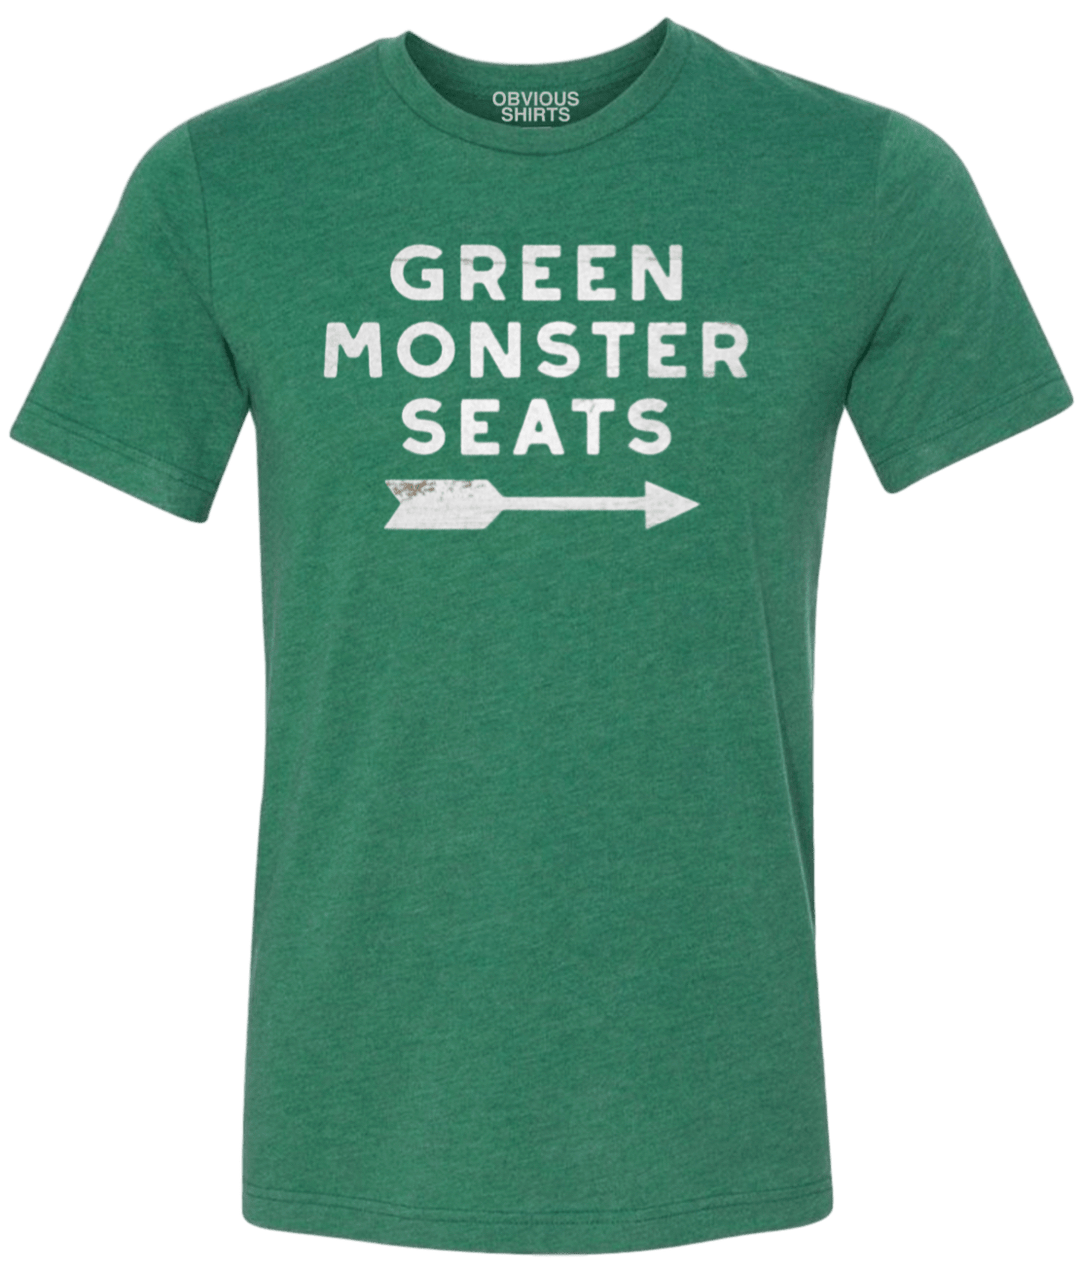 GREEN MONSTER SEATS. - OBVIOUS SHIRTS